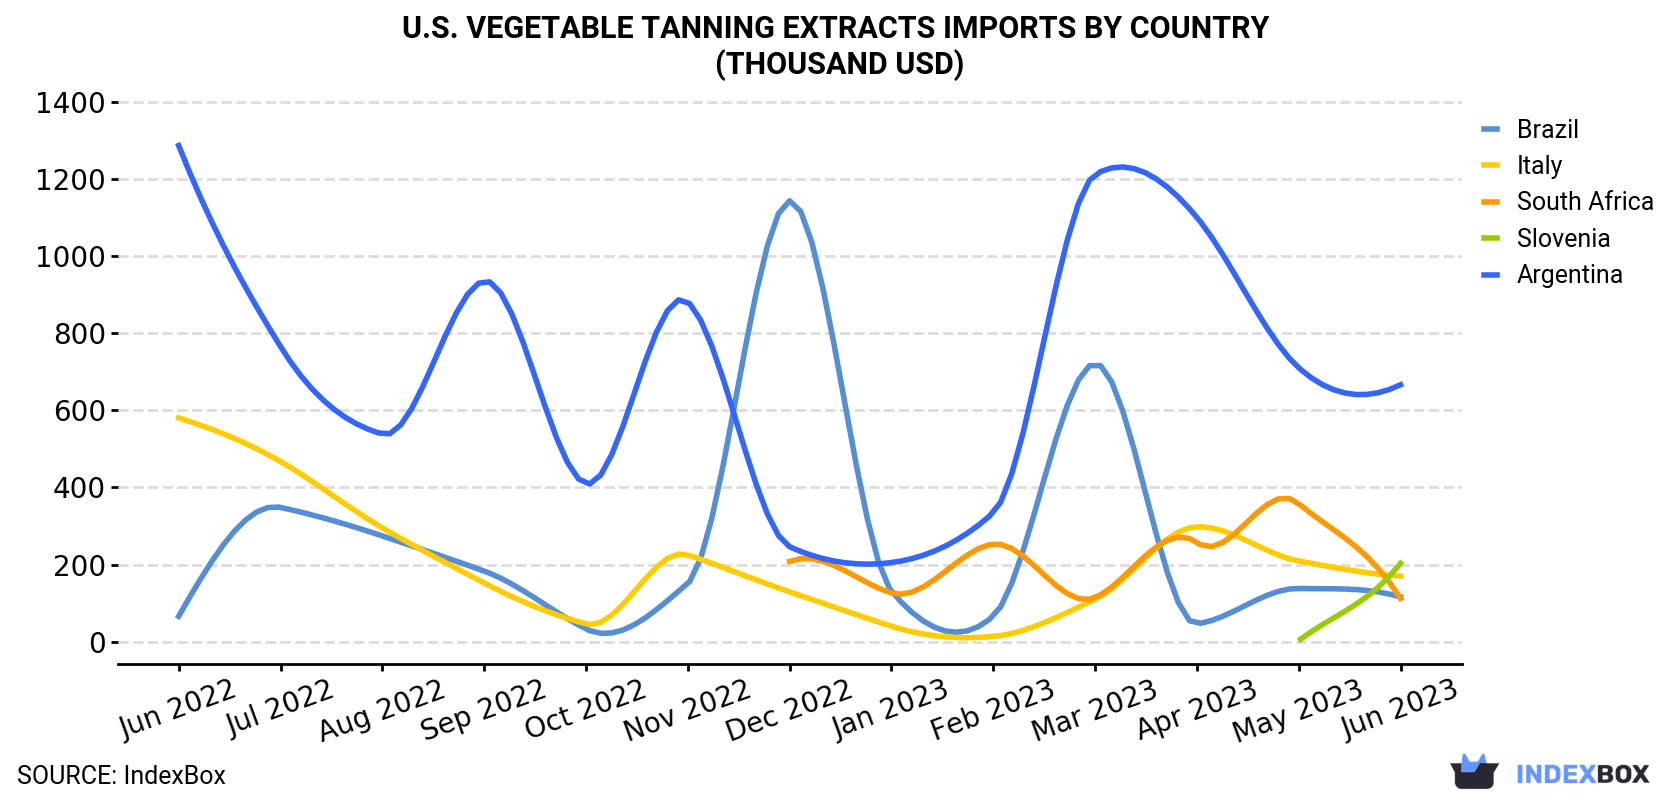 U.S. Vegetable Tanning Extracts Imports By Country (Thousand USD)